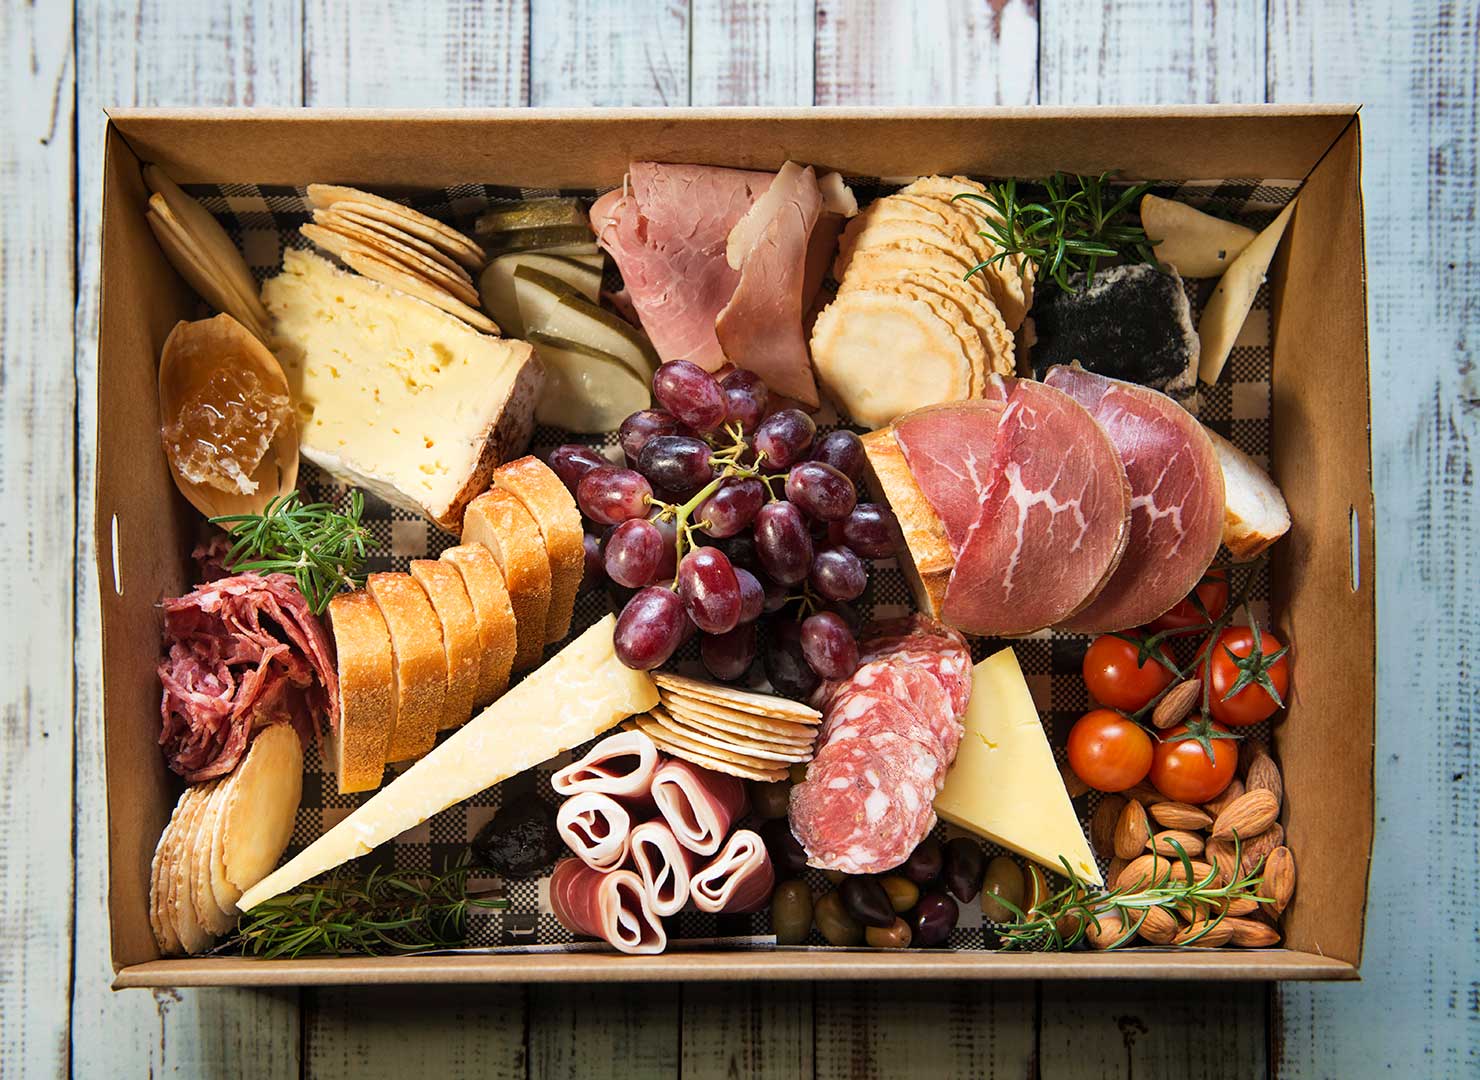 A mouth watering premium gourmet platter box of artisan farmhouse cheeses, cured meats sliced in house, fresh seasonal fruits and accompanied with Australian olives, pickles, semi dried tomatoes & much more. Complete with sourdough baguette or bread & crackers. One of our best sellers and only contains Australian produce. 